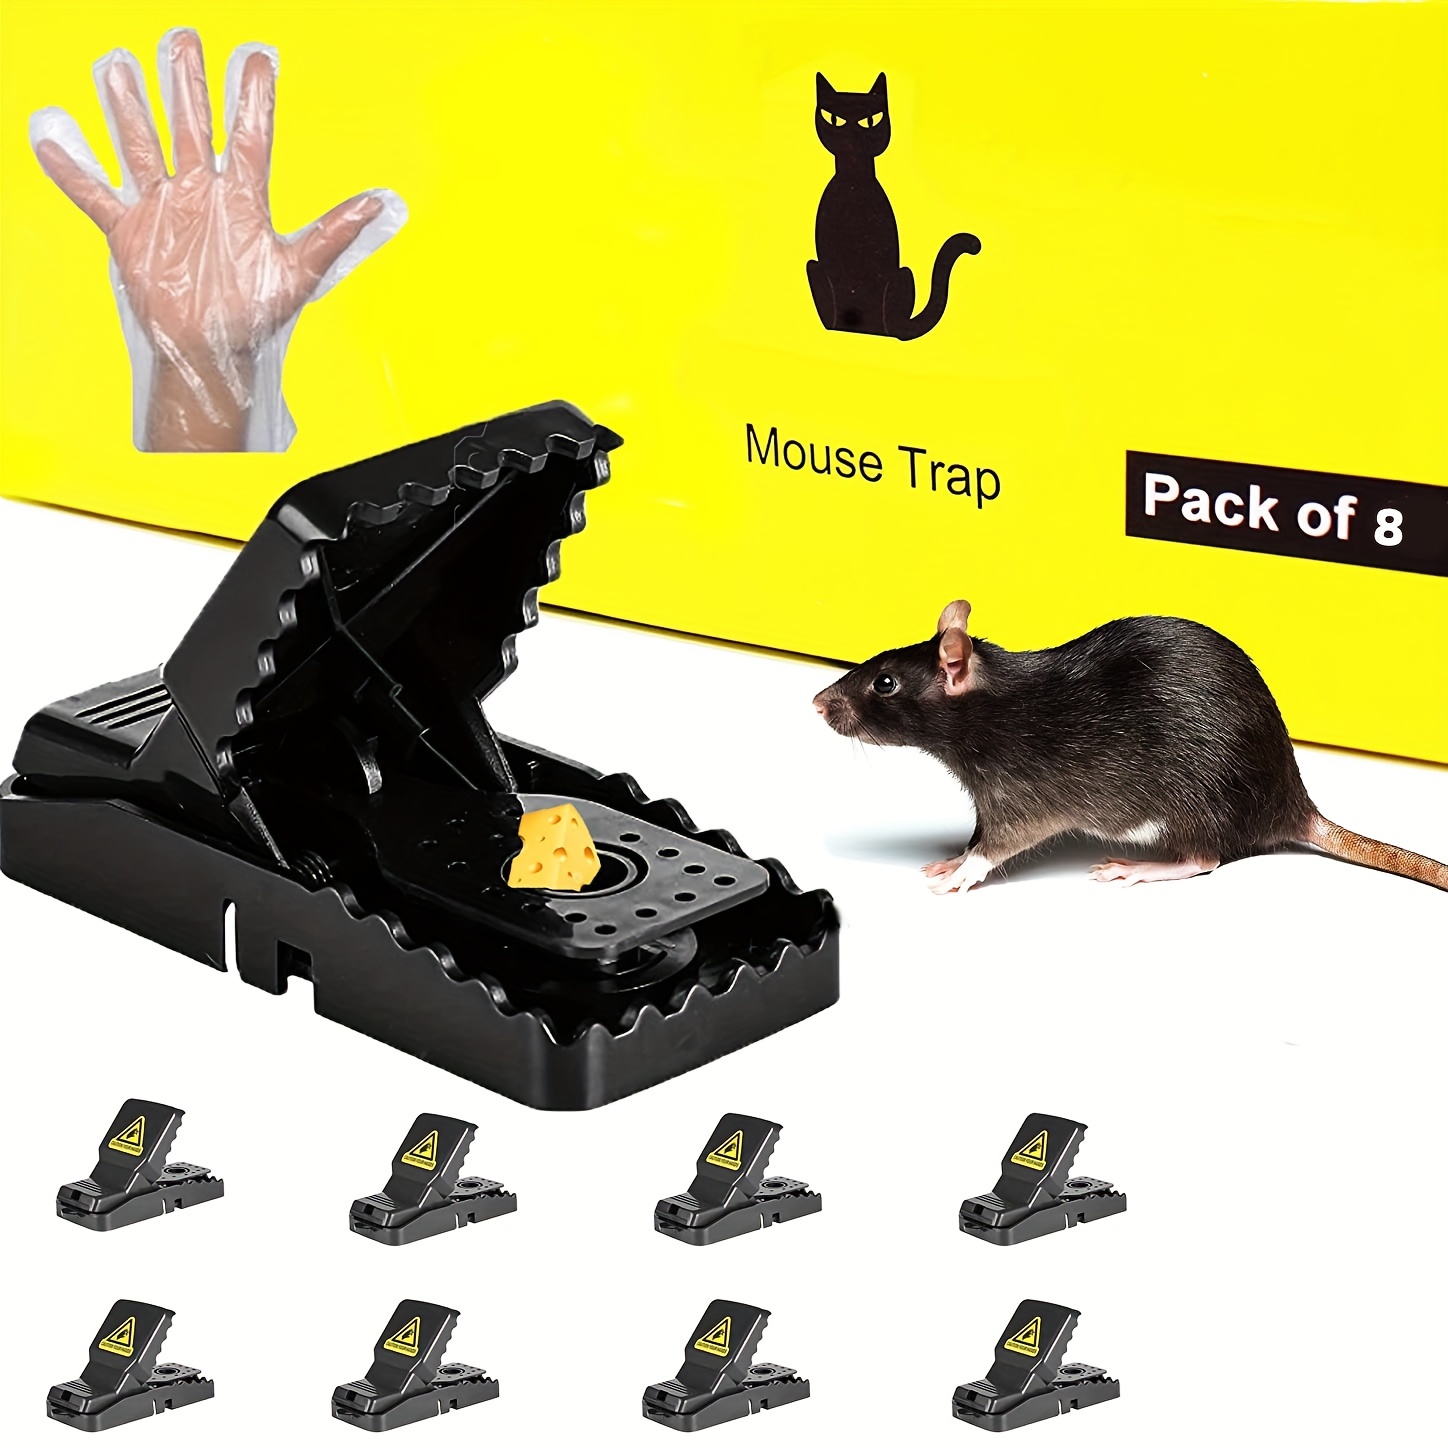 Sanitary and Effective Indoor Mouse Catcher for House, Indoor Mice